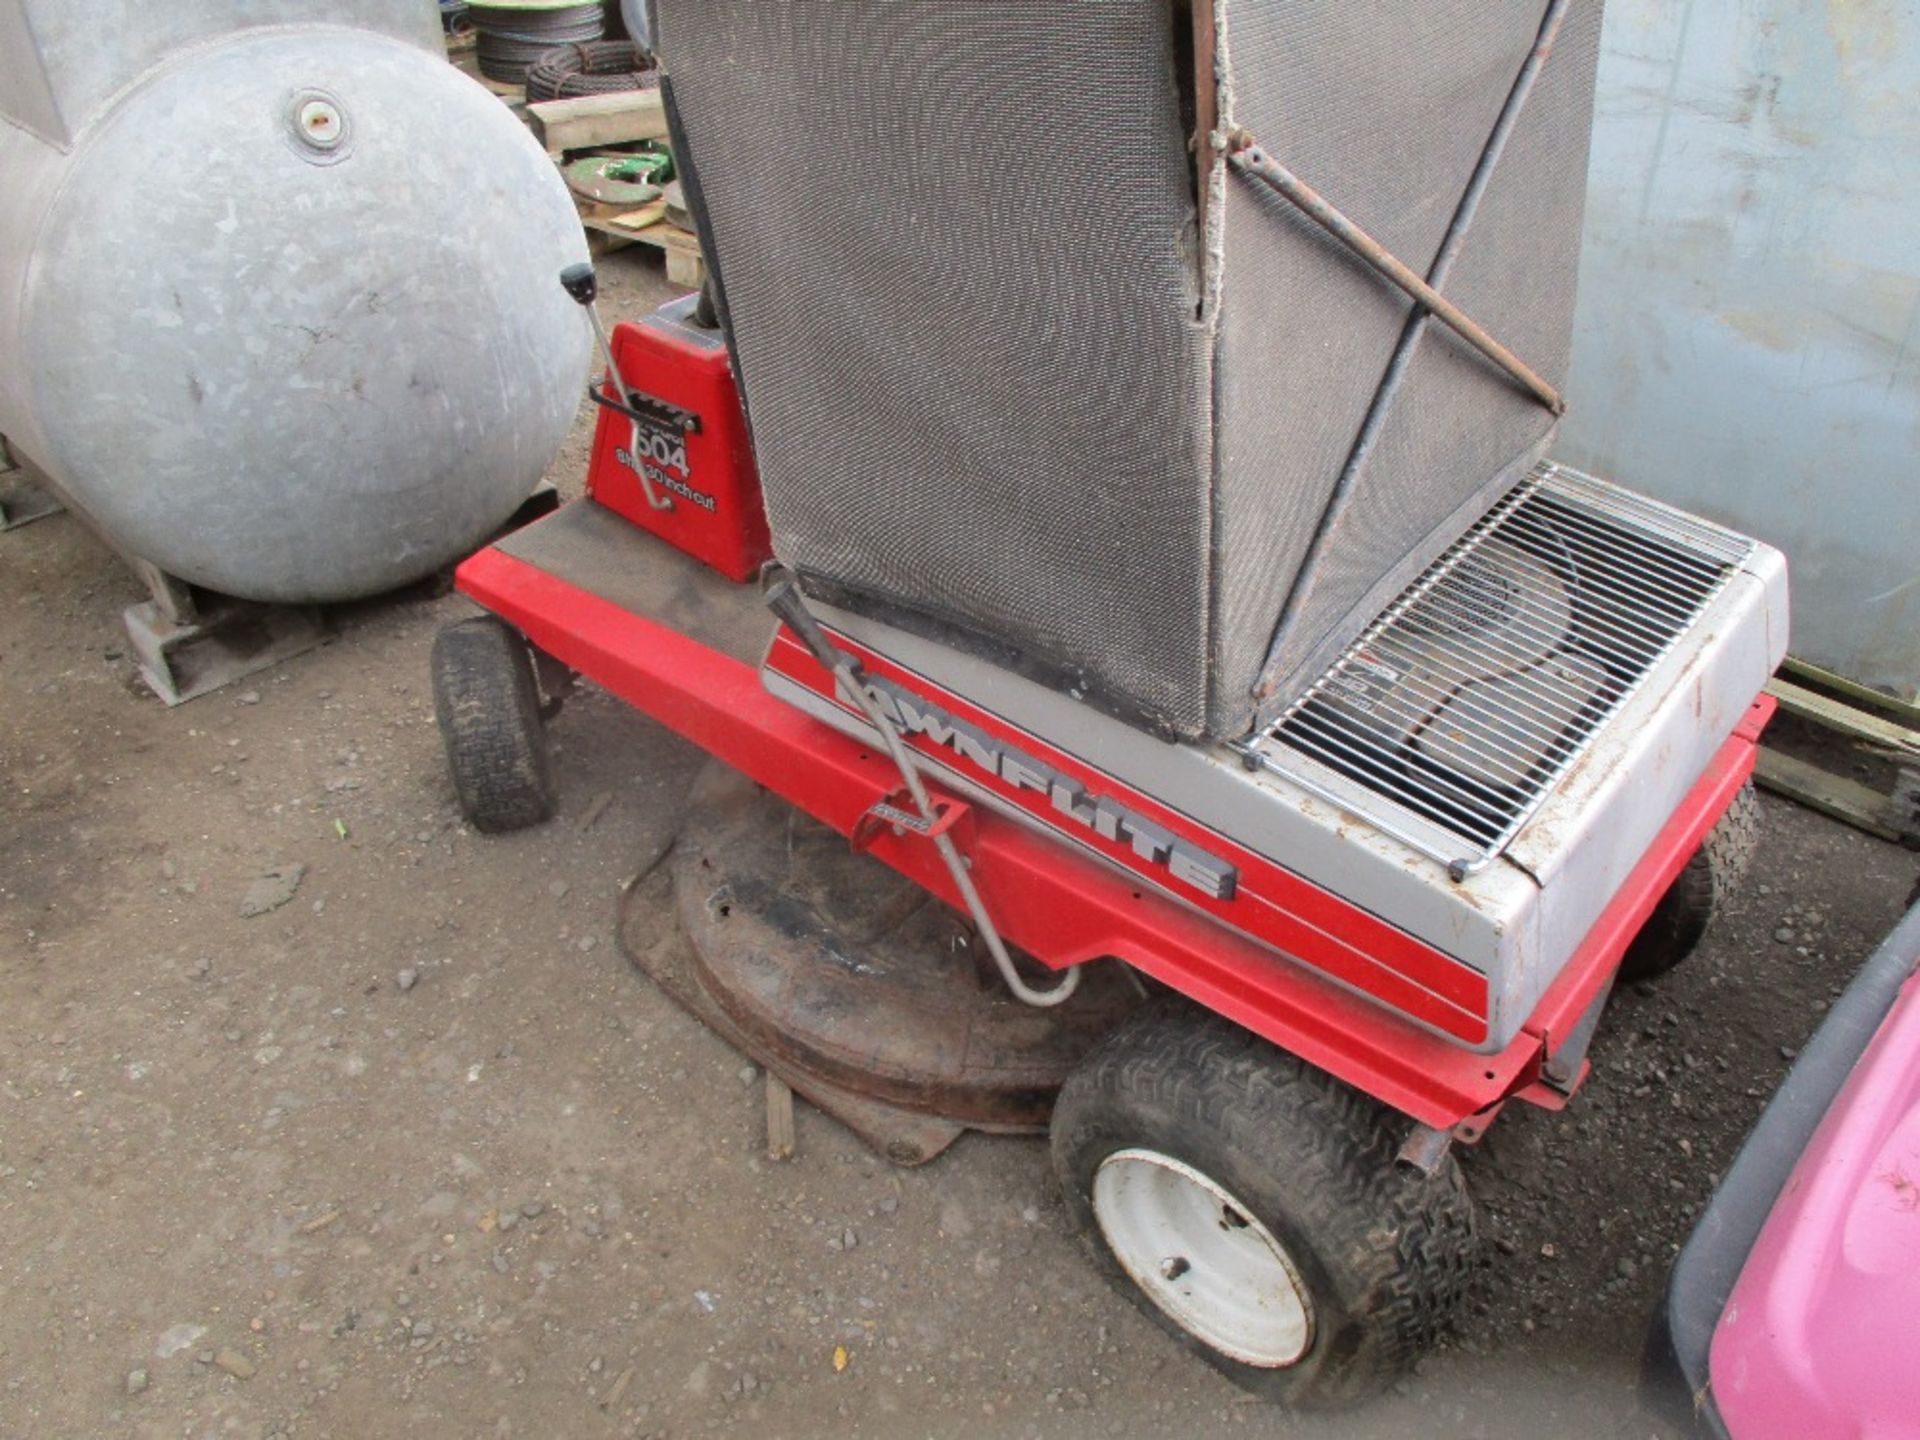 LAWNFLITE 504 PETROL MOWER, CONDITION UNKNOWN - Image 2 of 2